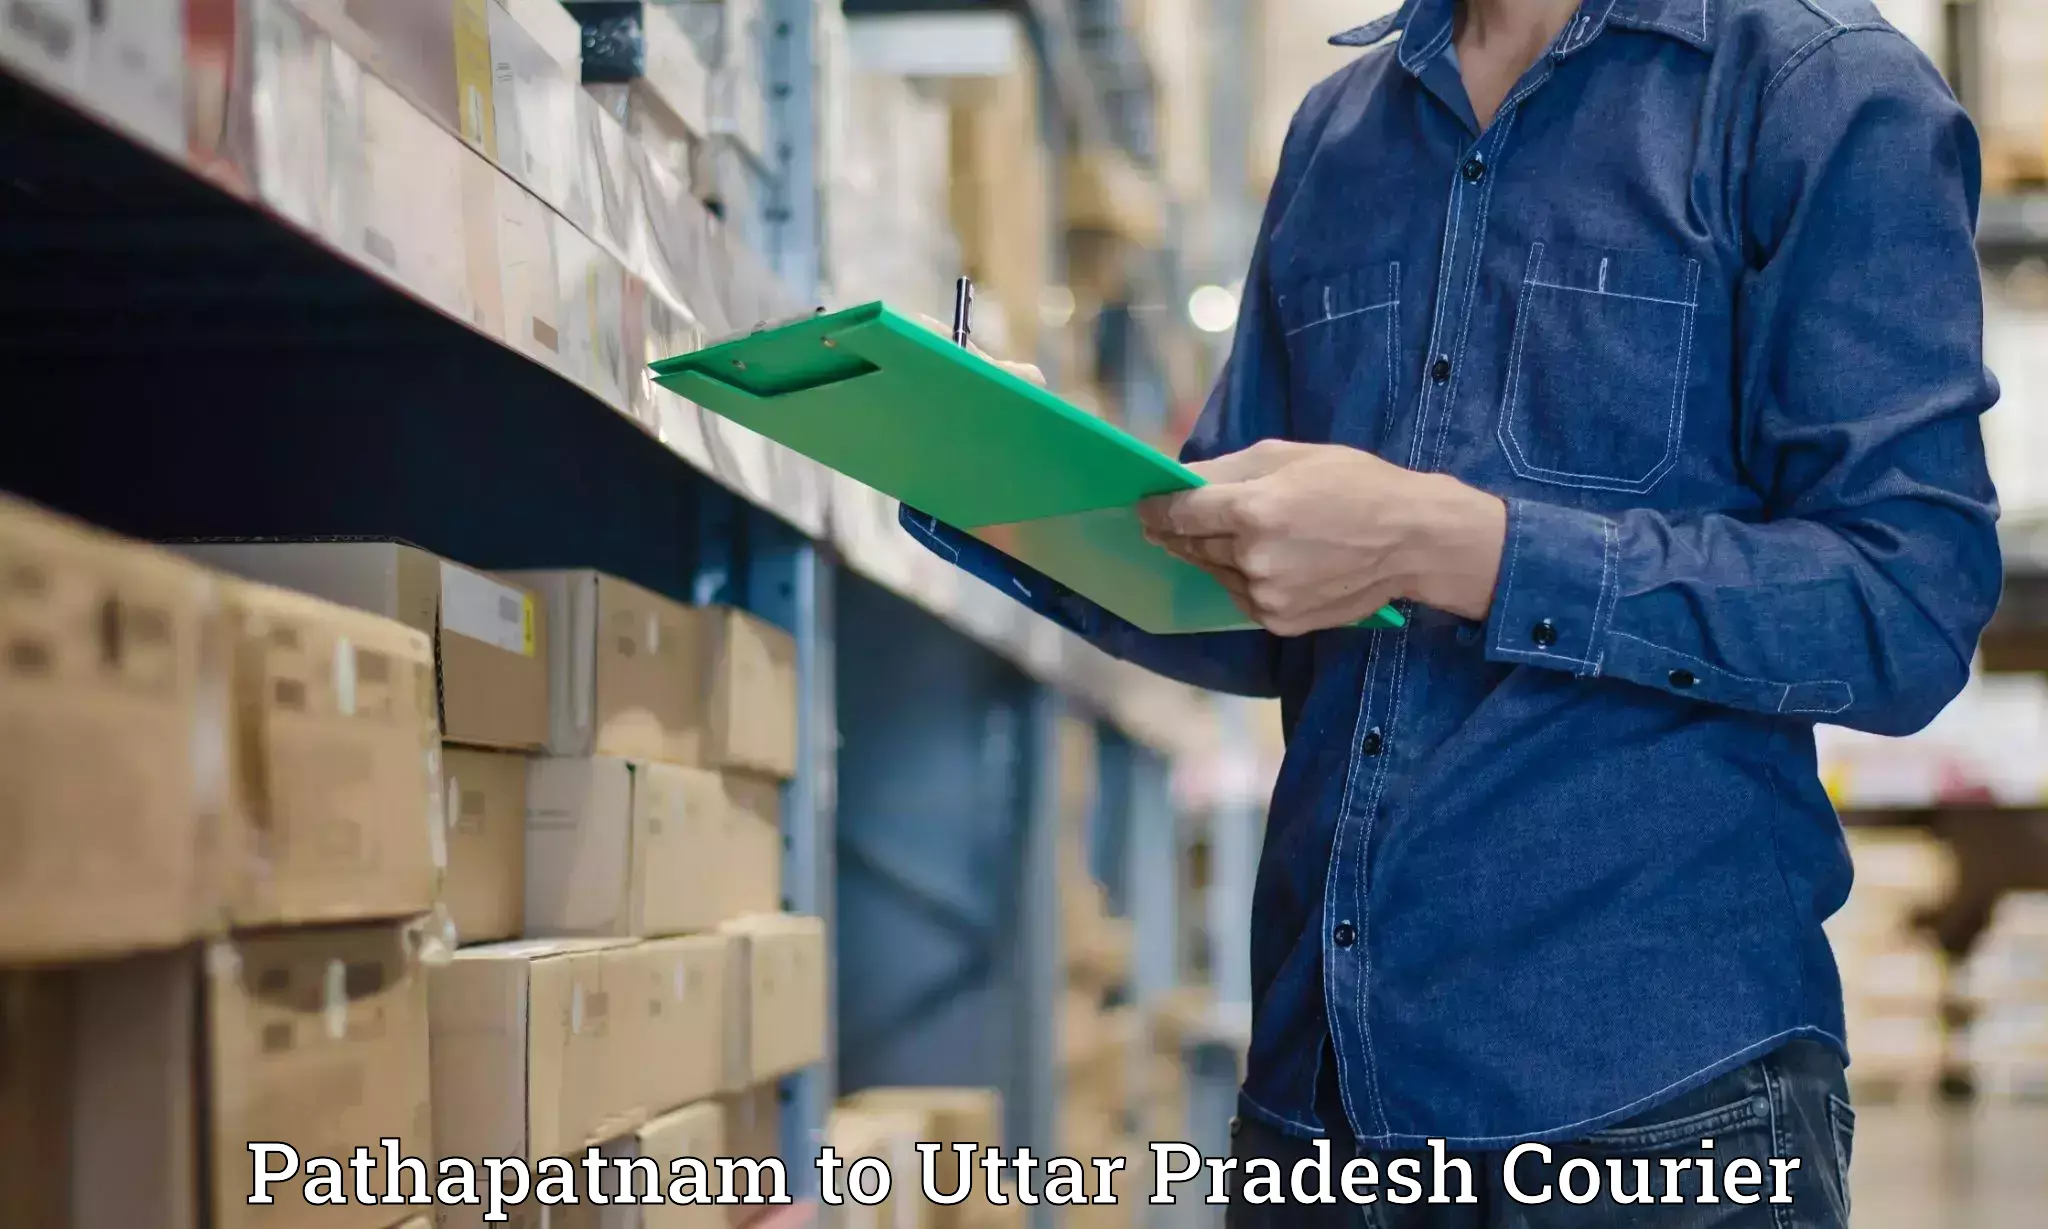 Efficient shipping operations Pathapatnam to Sonbhadra